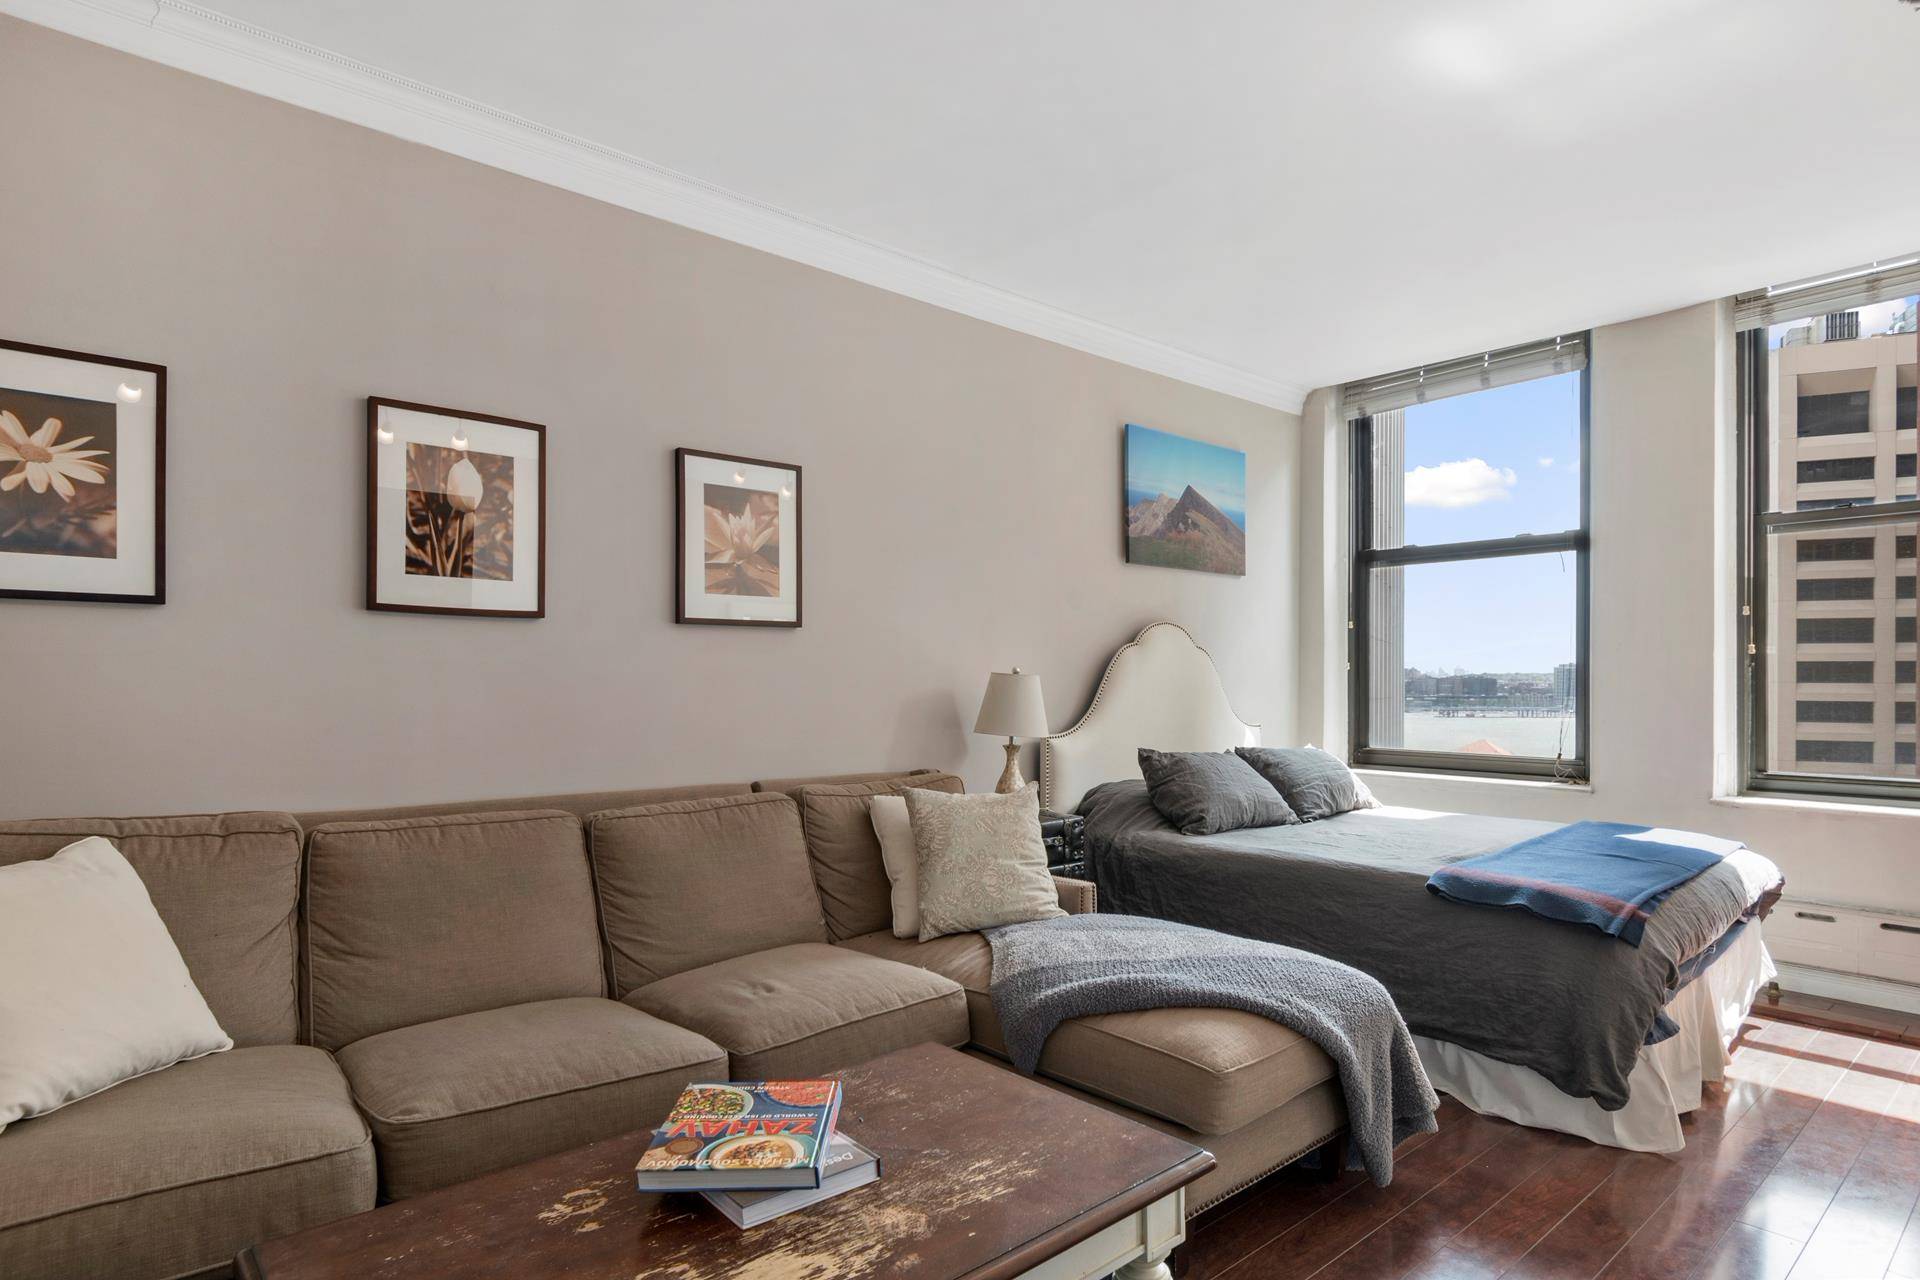 Unit 7K is a fully renovated, large studio compete with direct views of the East River.